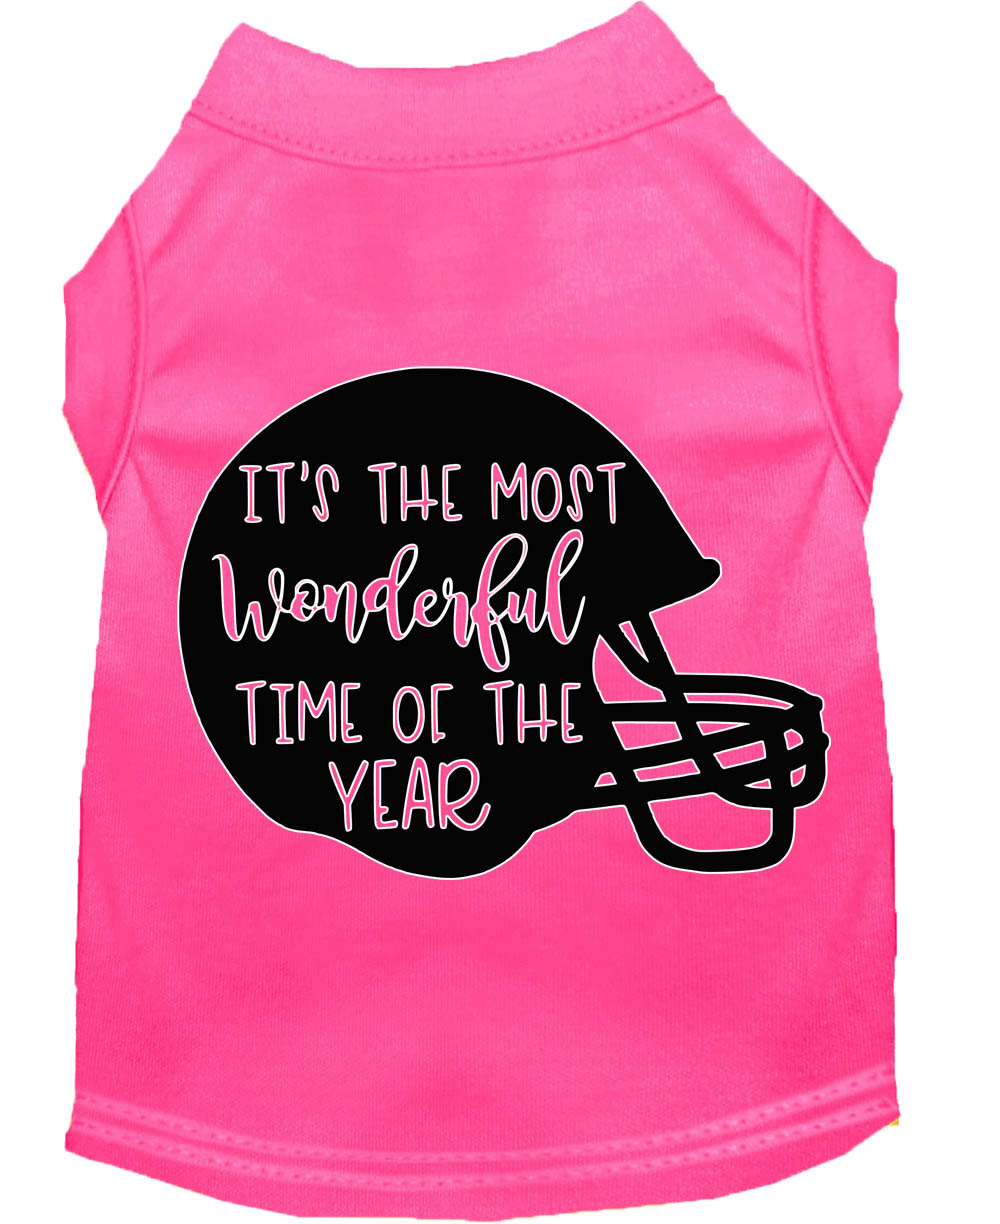 Most Wonderful Time of the Year (Football) Screen Print Dog Shirt Bright Pink Sm